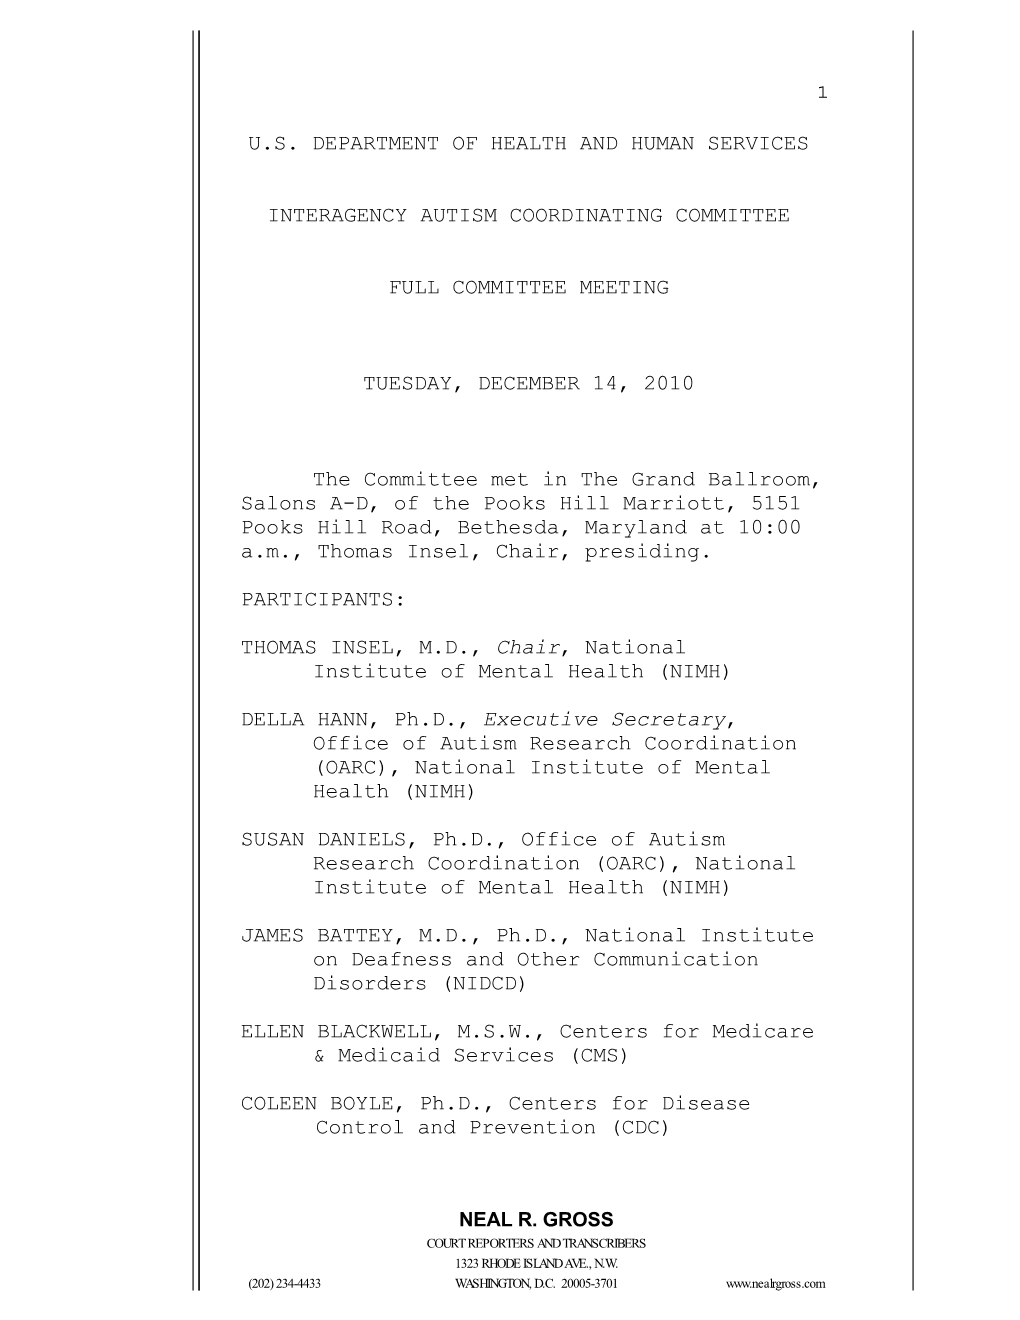 Transcript of the December 14, 2010 IACC Meeting